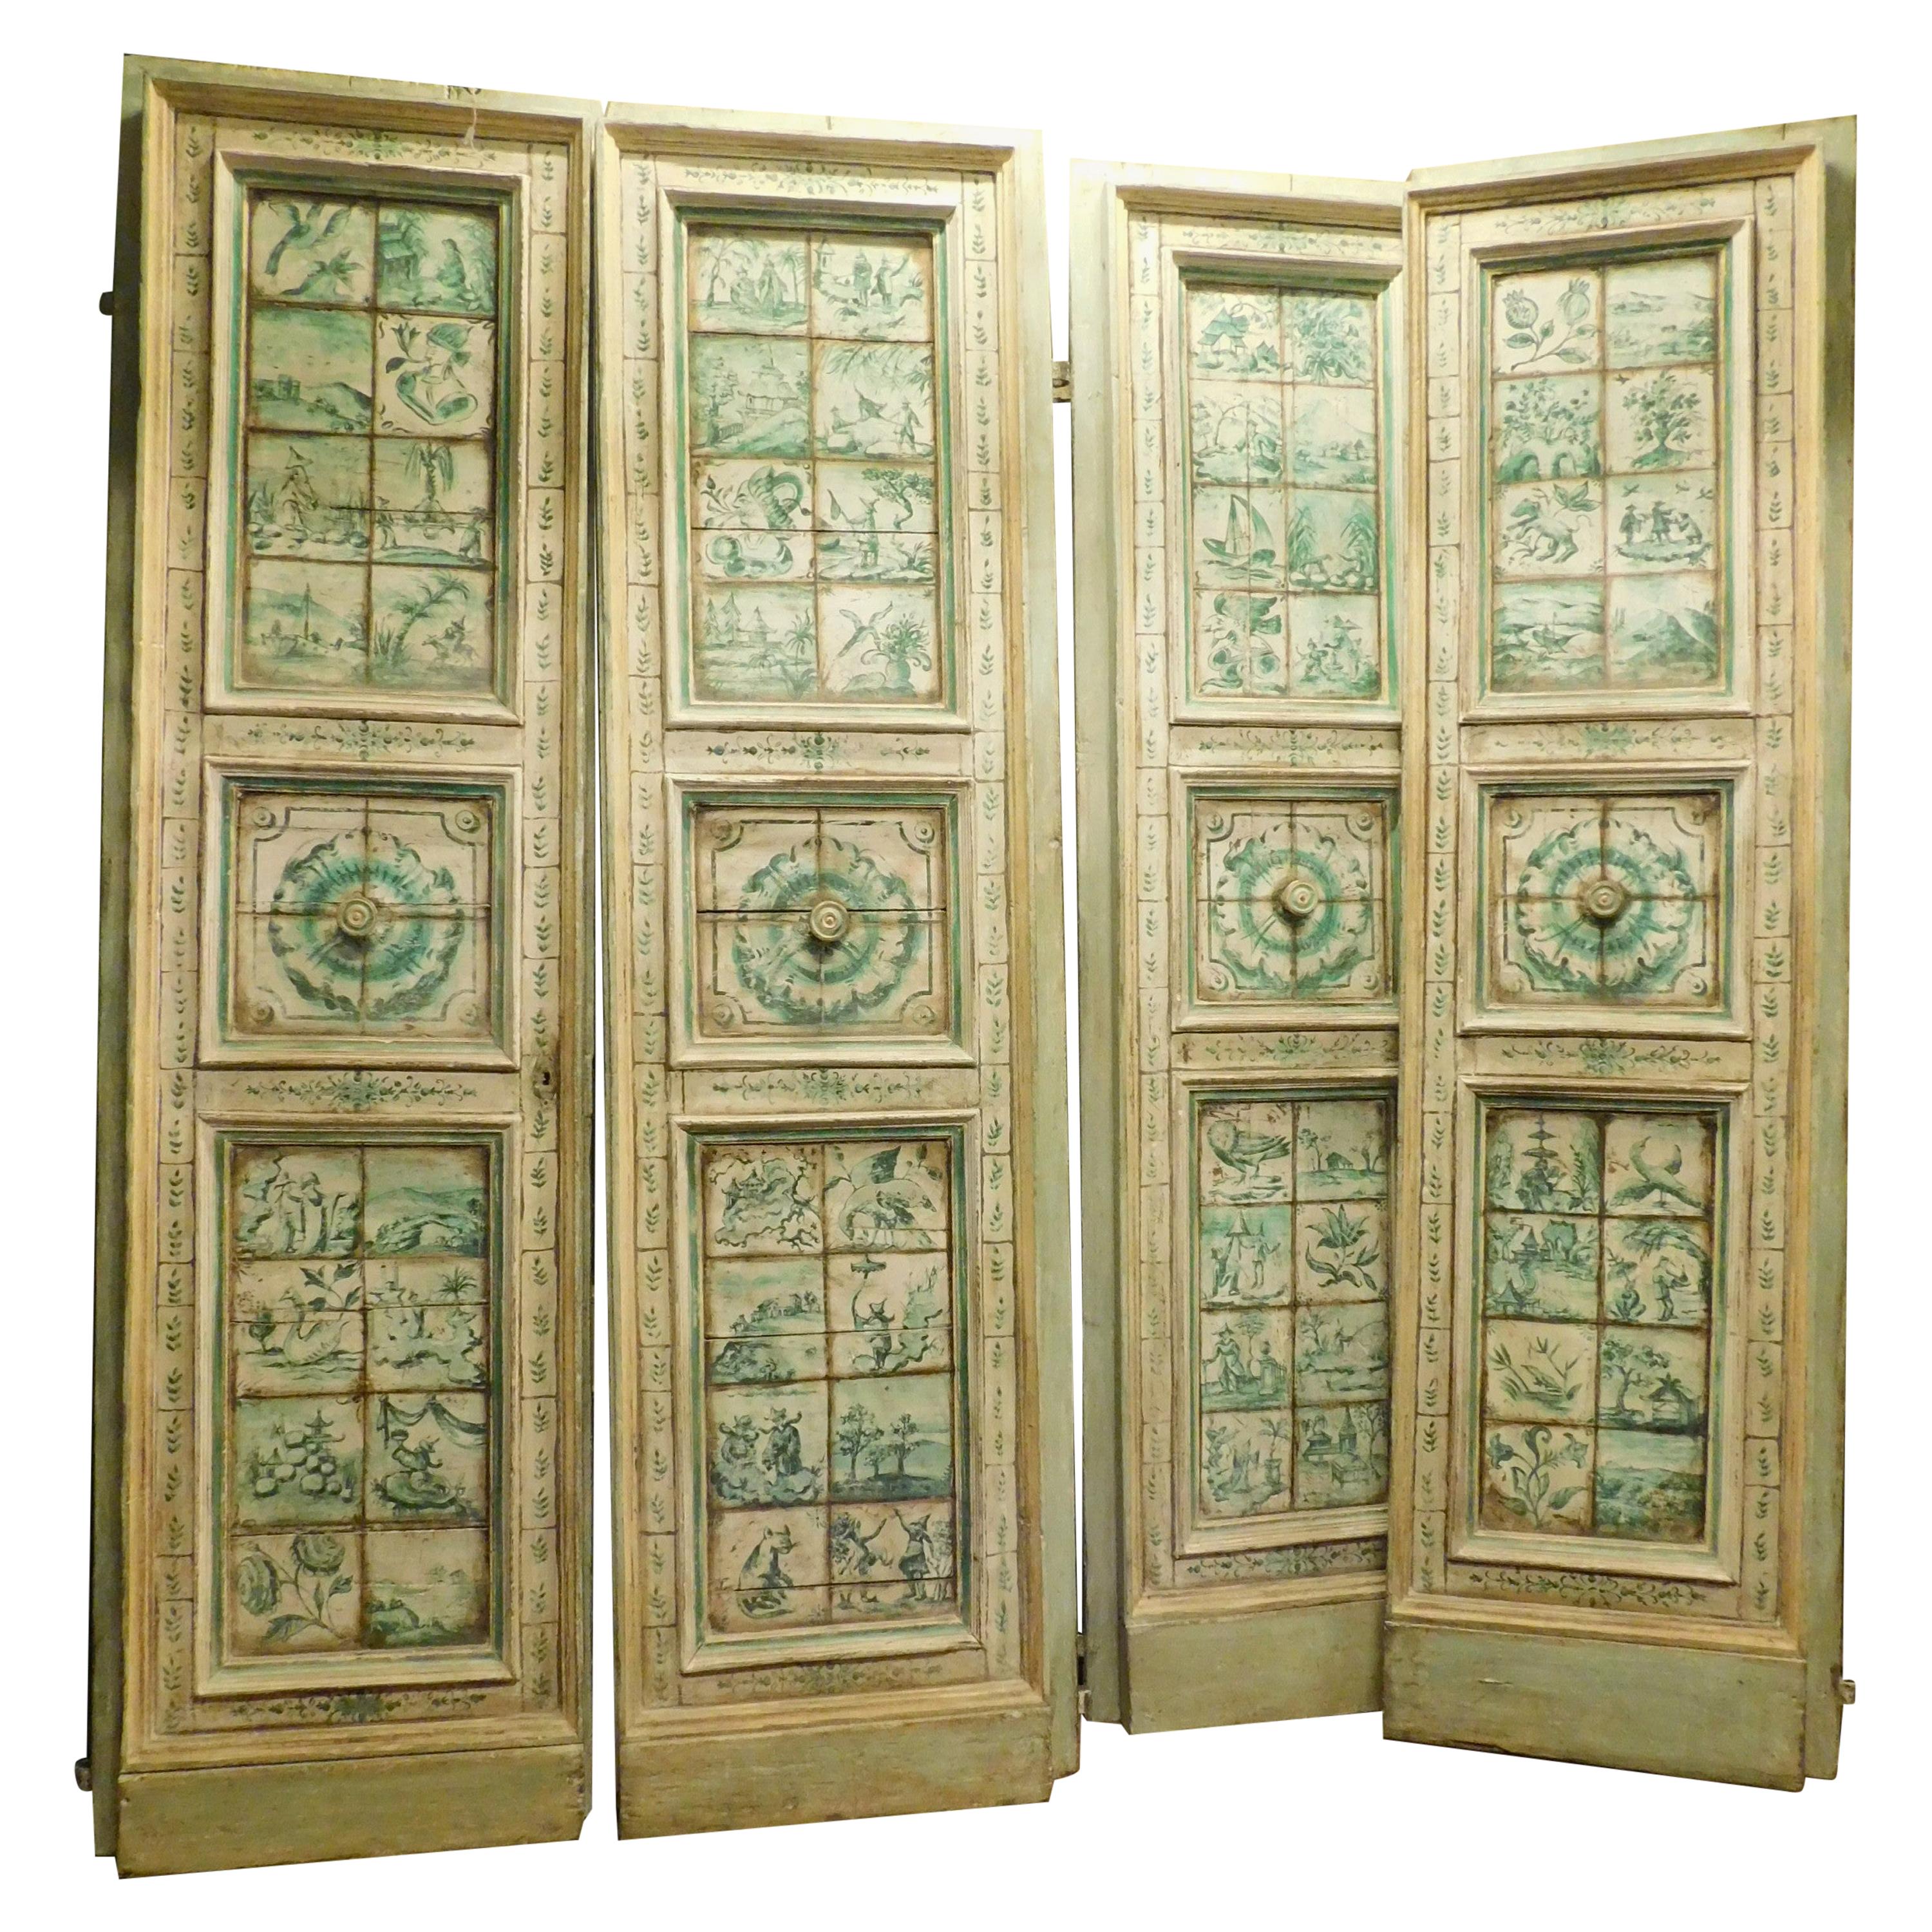 5 Pairs of Antiques Doors with Majolica Hand Paintings, Tuscany, Italy, 1700 For Sale